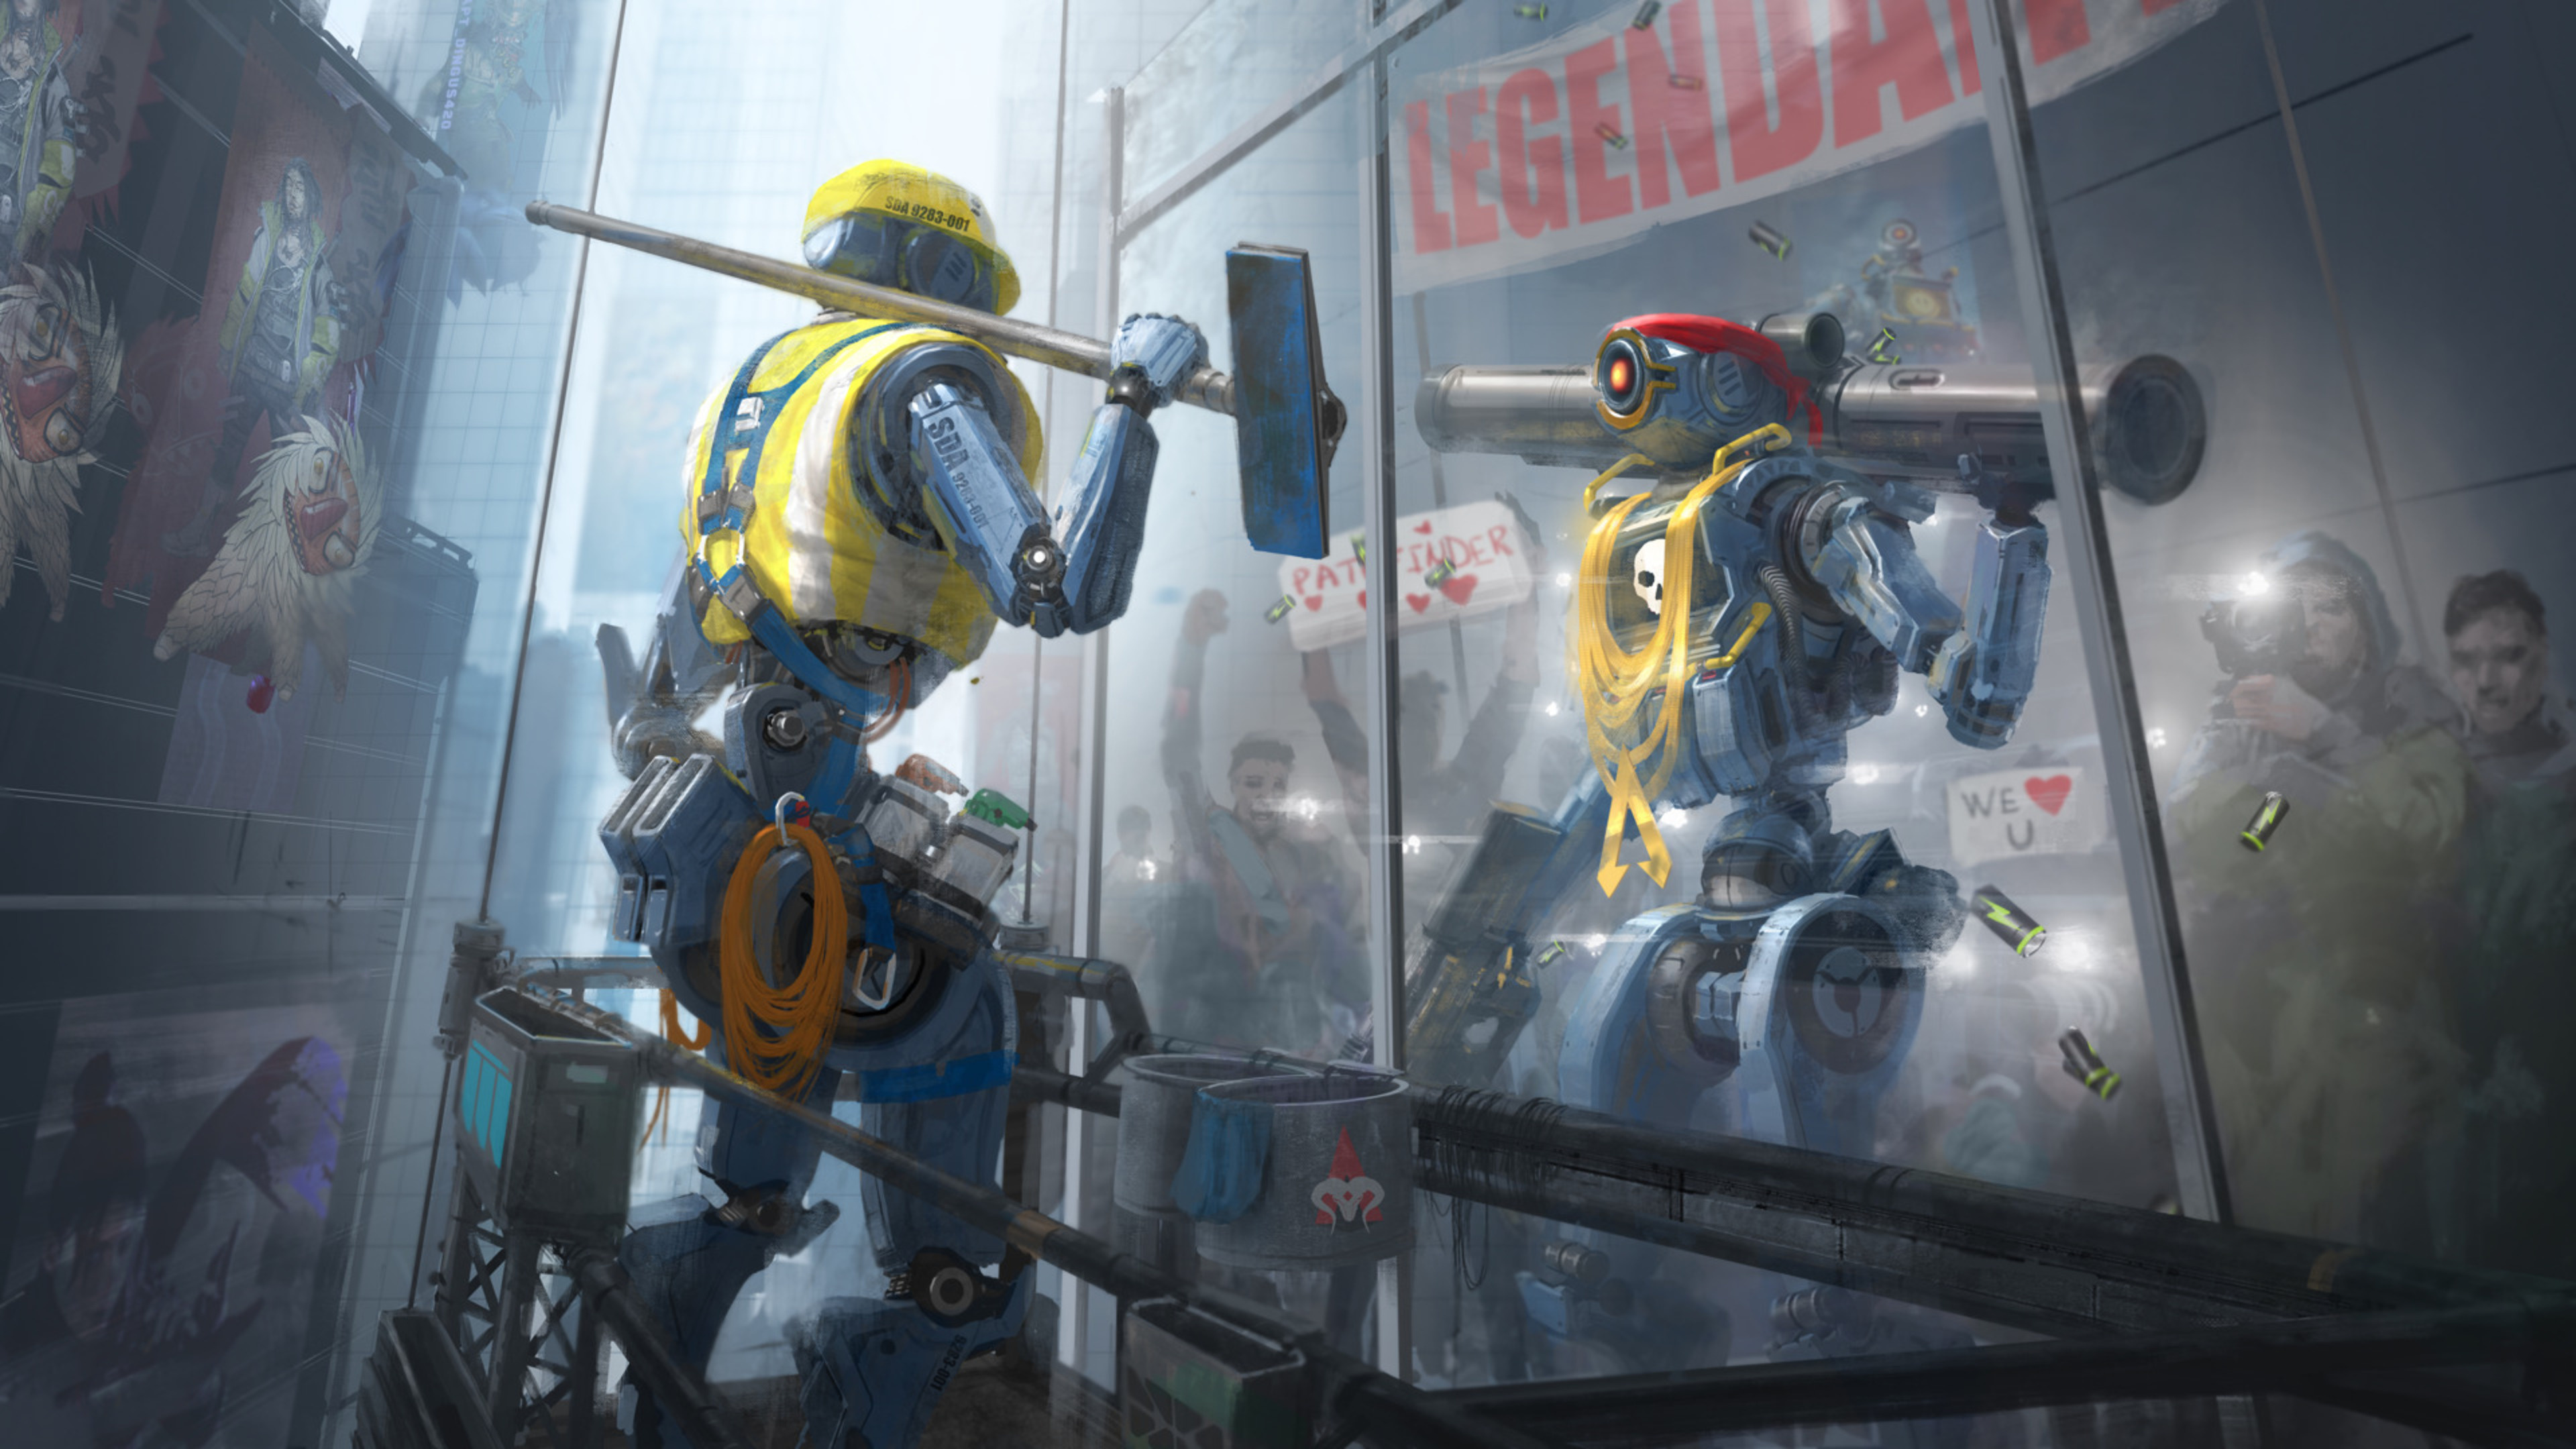 Apex Legends: MRVN "Pathfinder", A Recon-Type, One of the Starting 8. 3840x2160 4K Background.